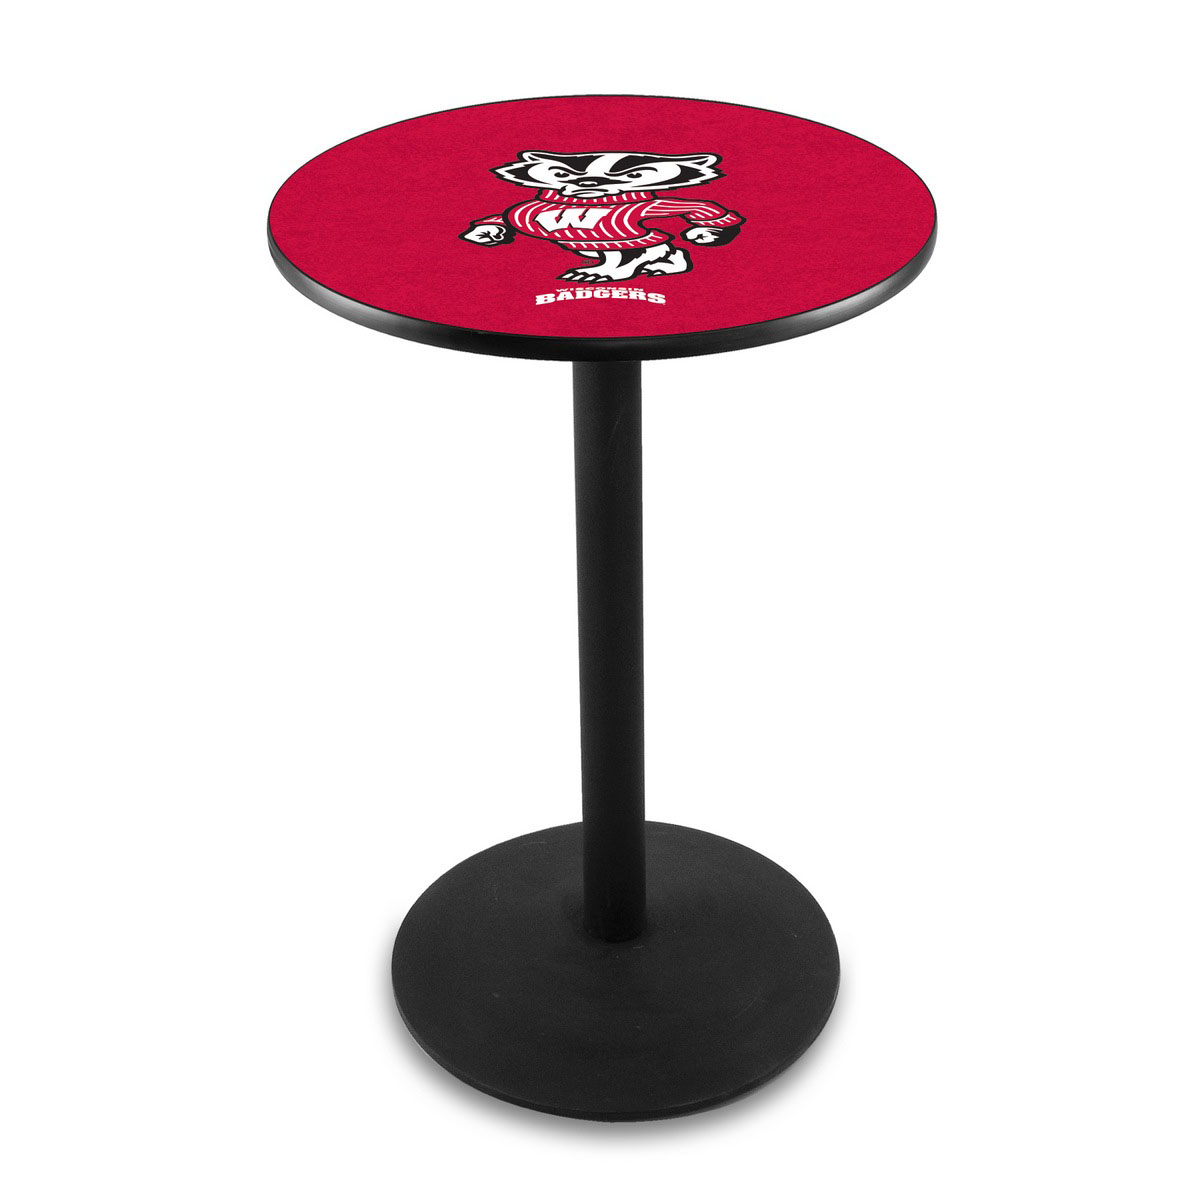 University Of Wisconsin (badger) Logo Pub Bar Table With Round Stand